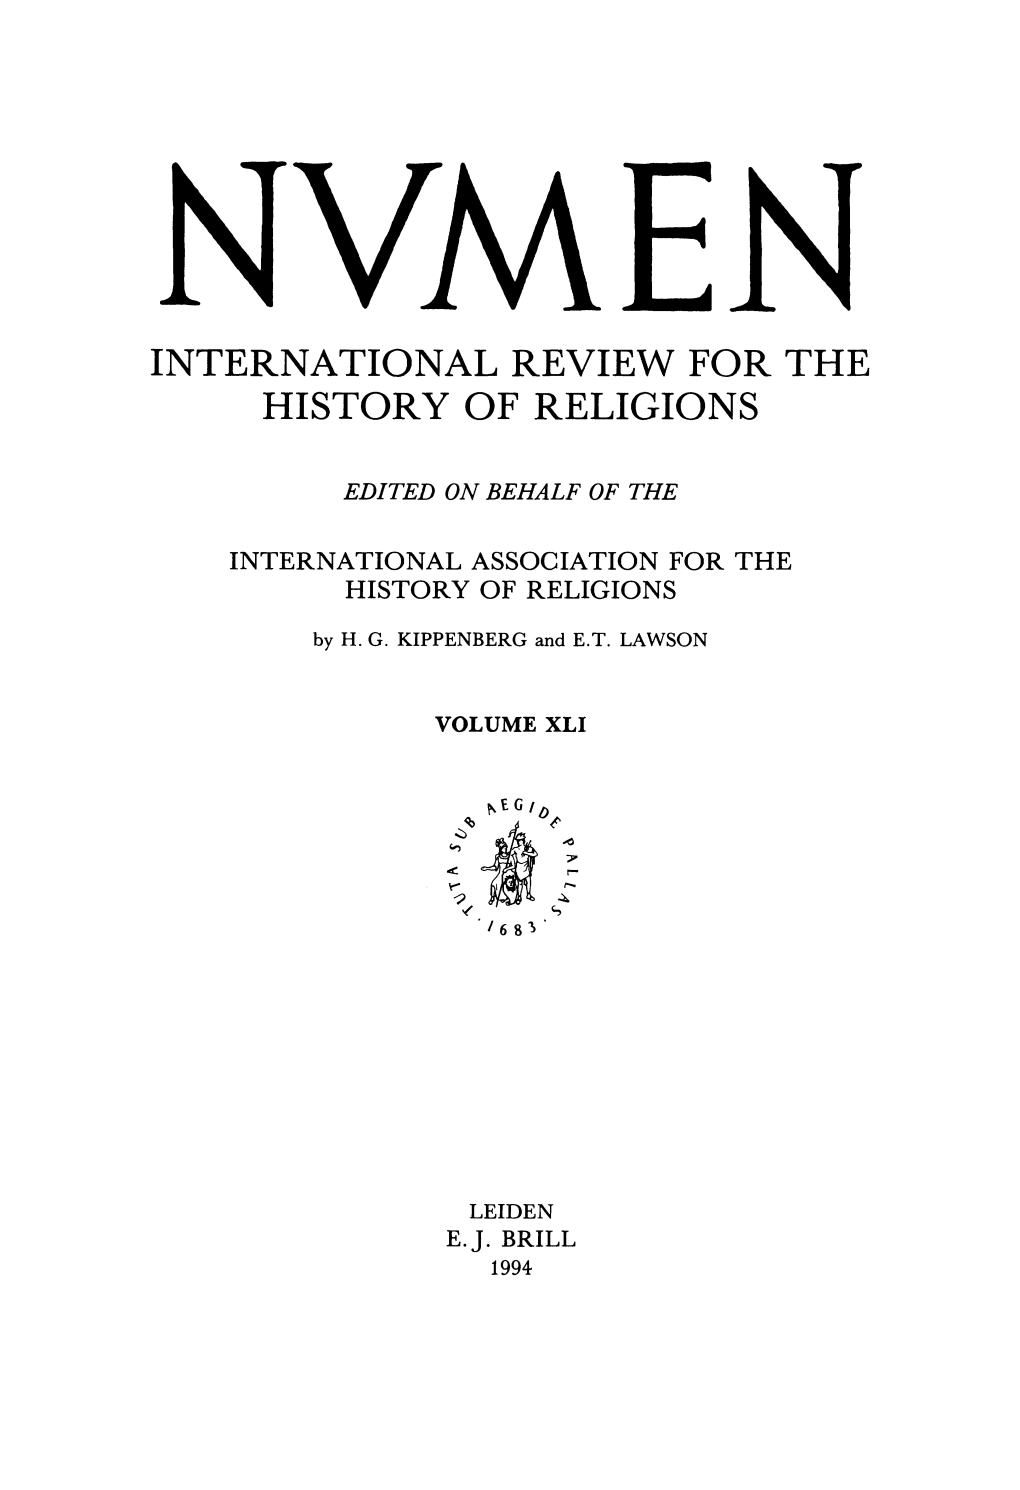 International Review for the History of Religions